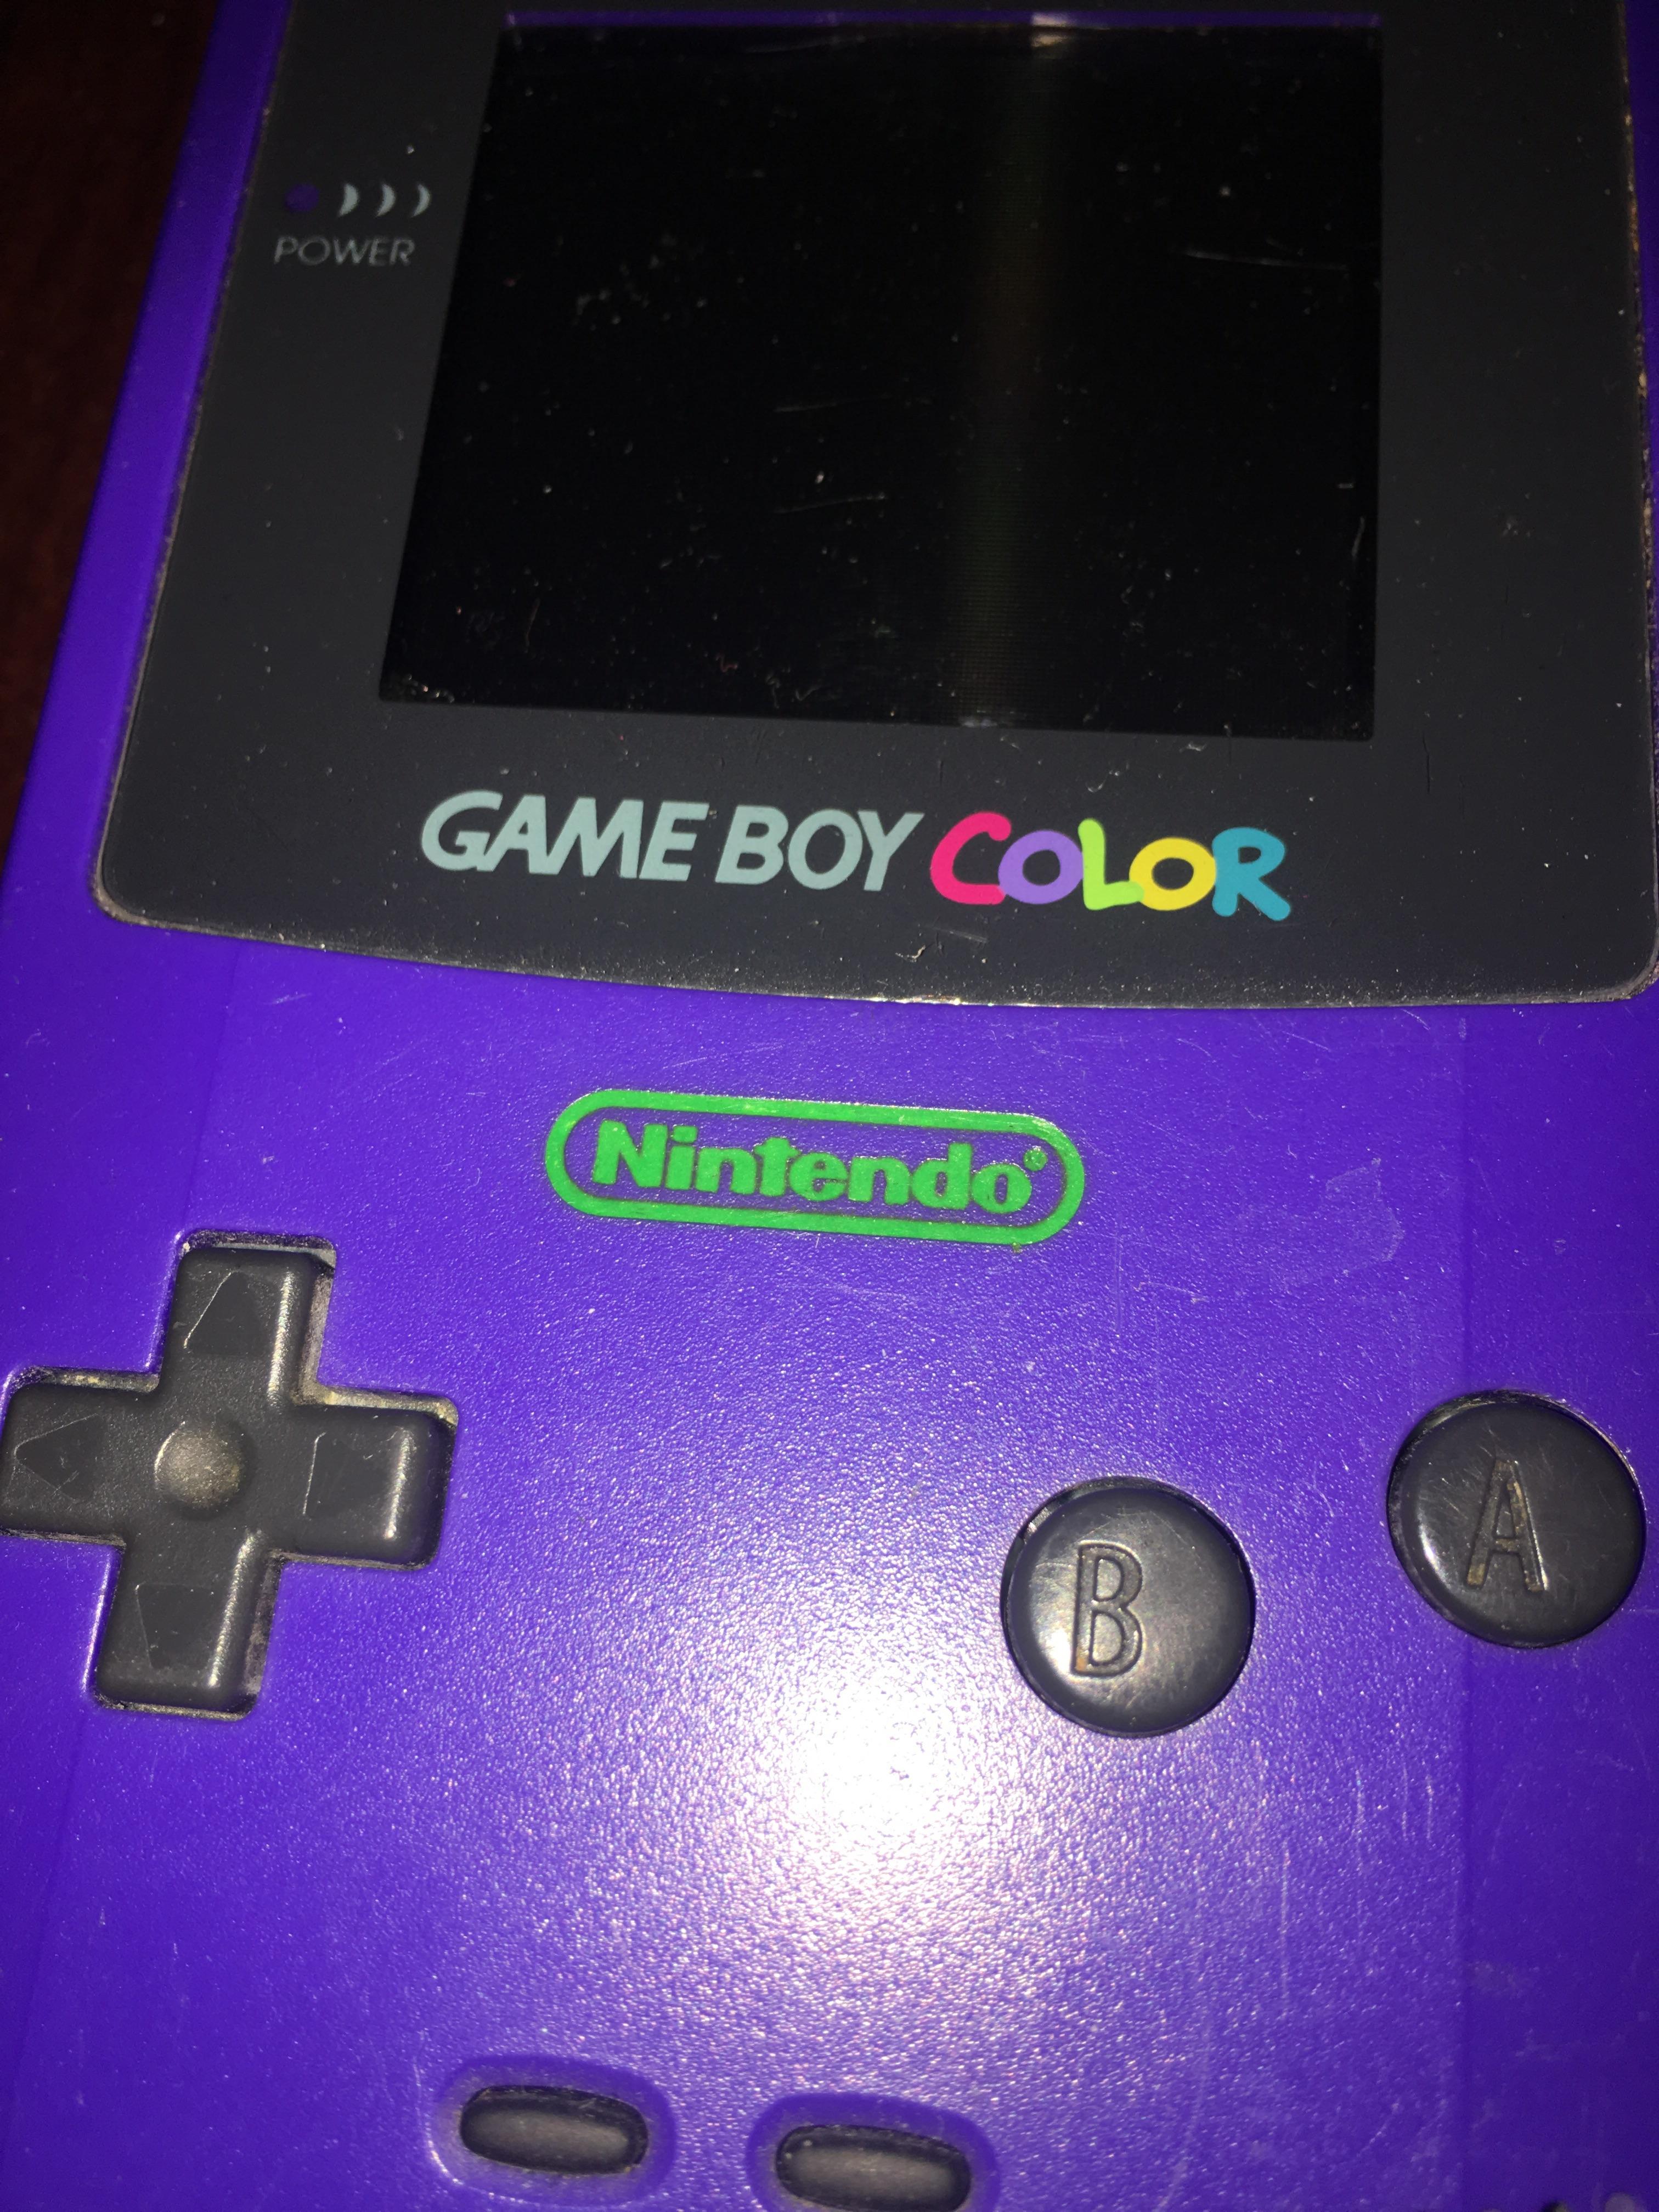 I filled in the Nintendo logo on my Gameboy Color using a.